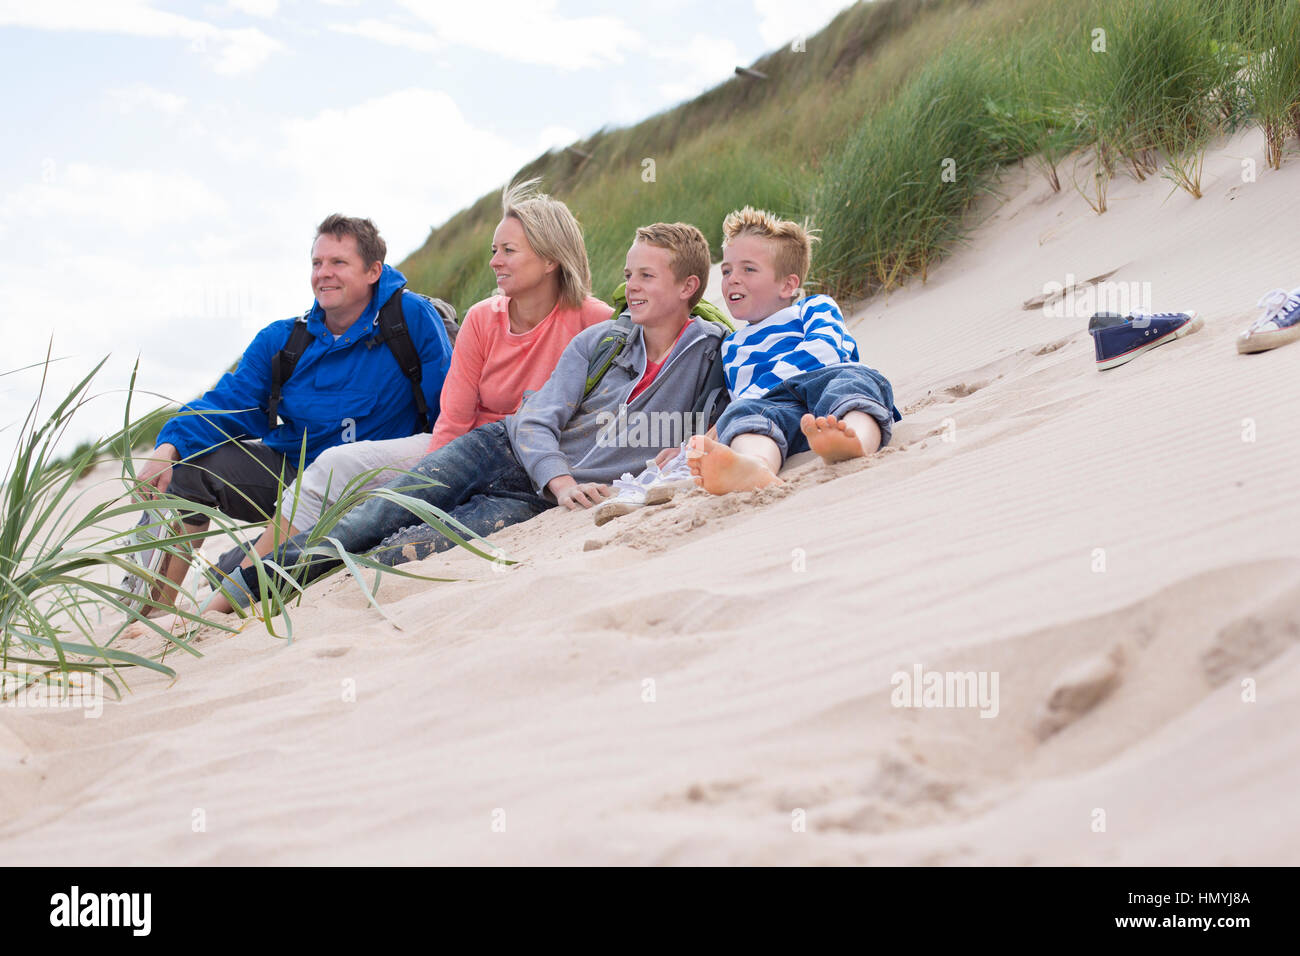 Family of four sitting on the sand dunes. They are wearing warm, casual clothing and looking out to sea. Stock Photo